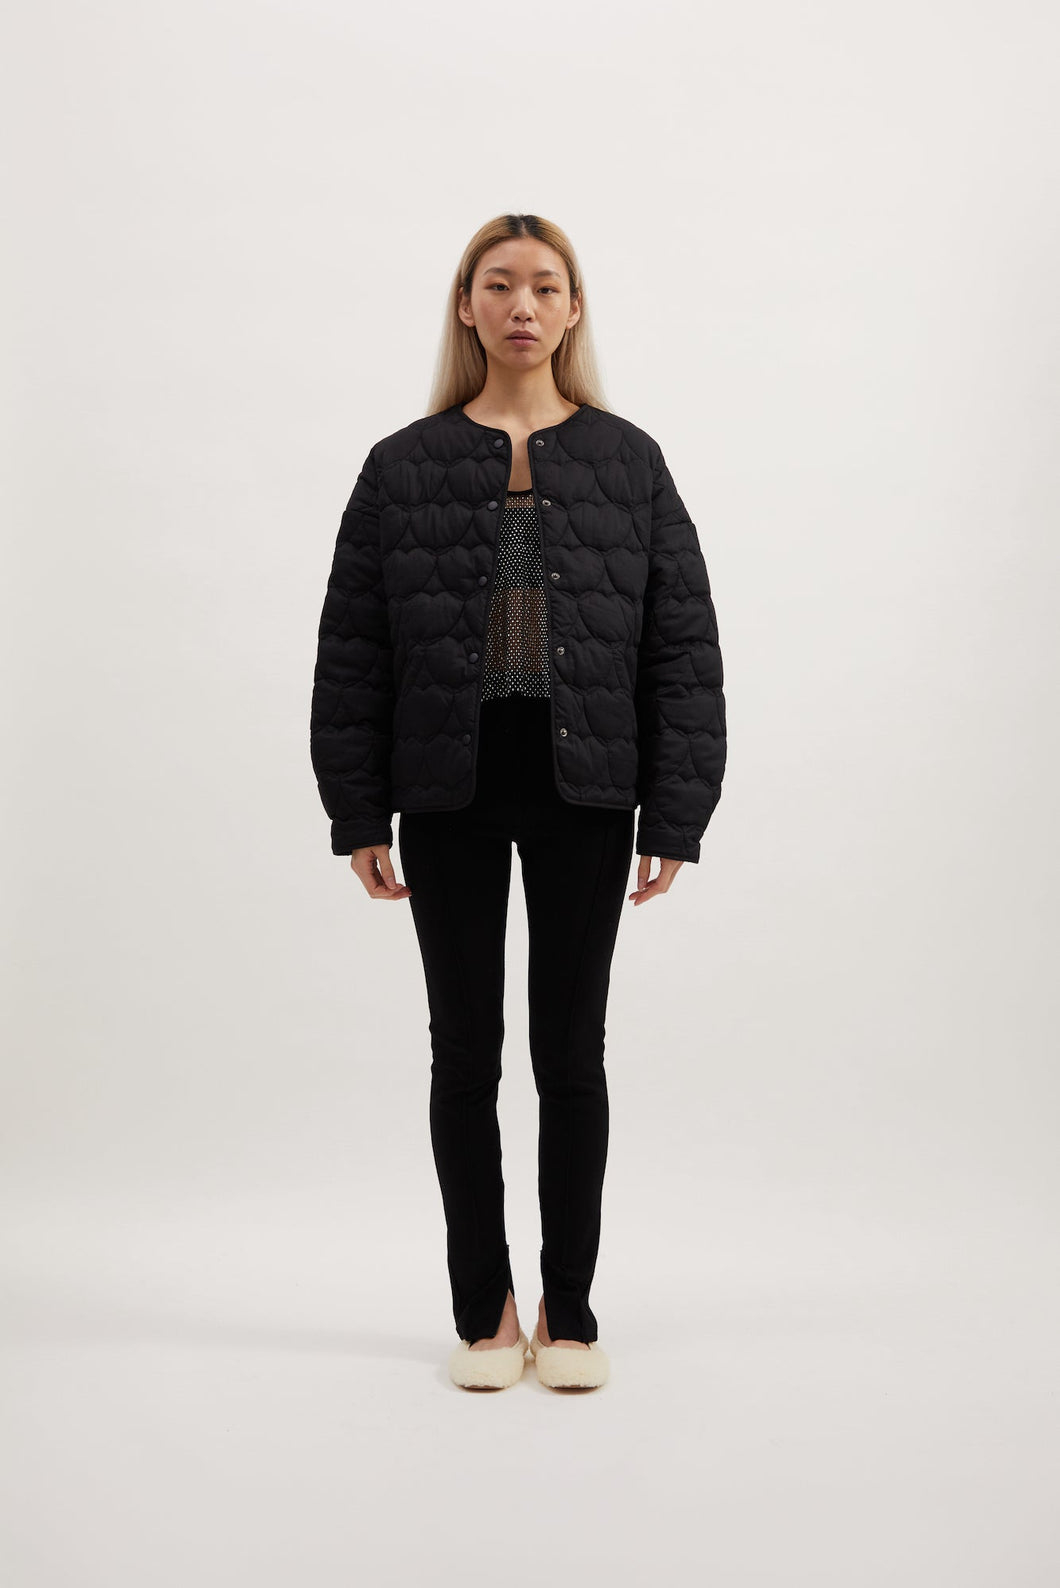 Remain Ava Quilted Jacket - Black  Hyde Boutique   